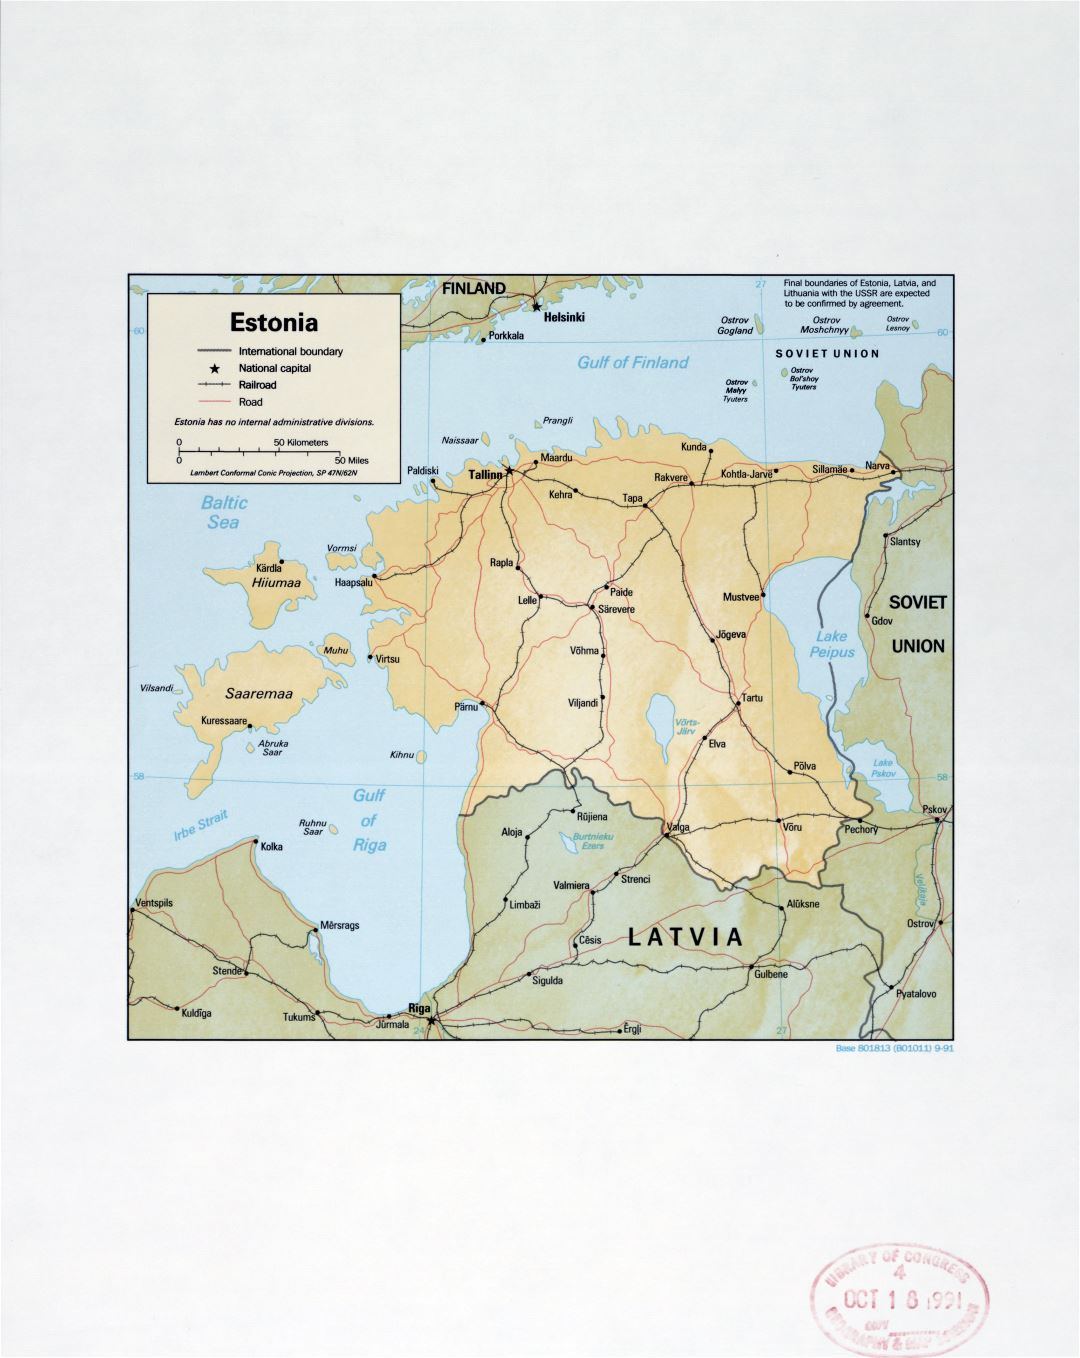 Large detail political map of Estonia with relief, marks of major cities, roads and railroads - 1991